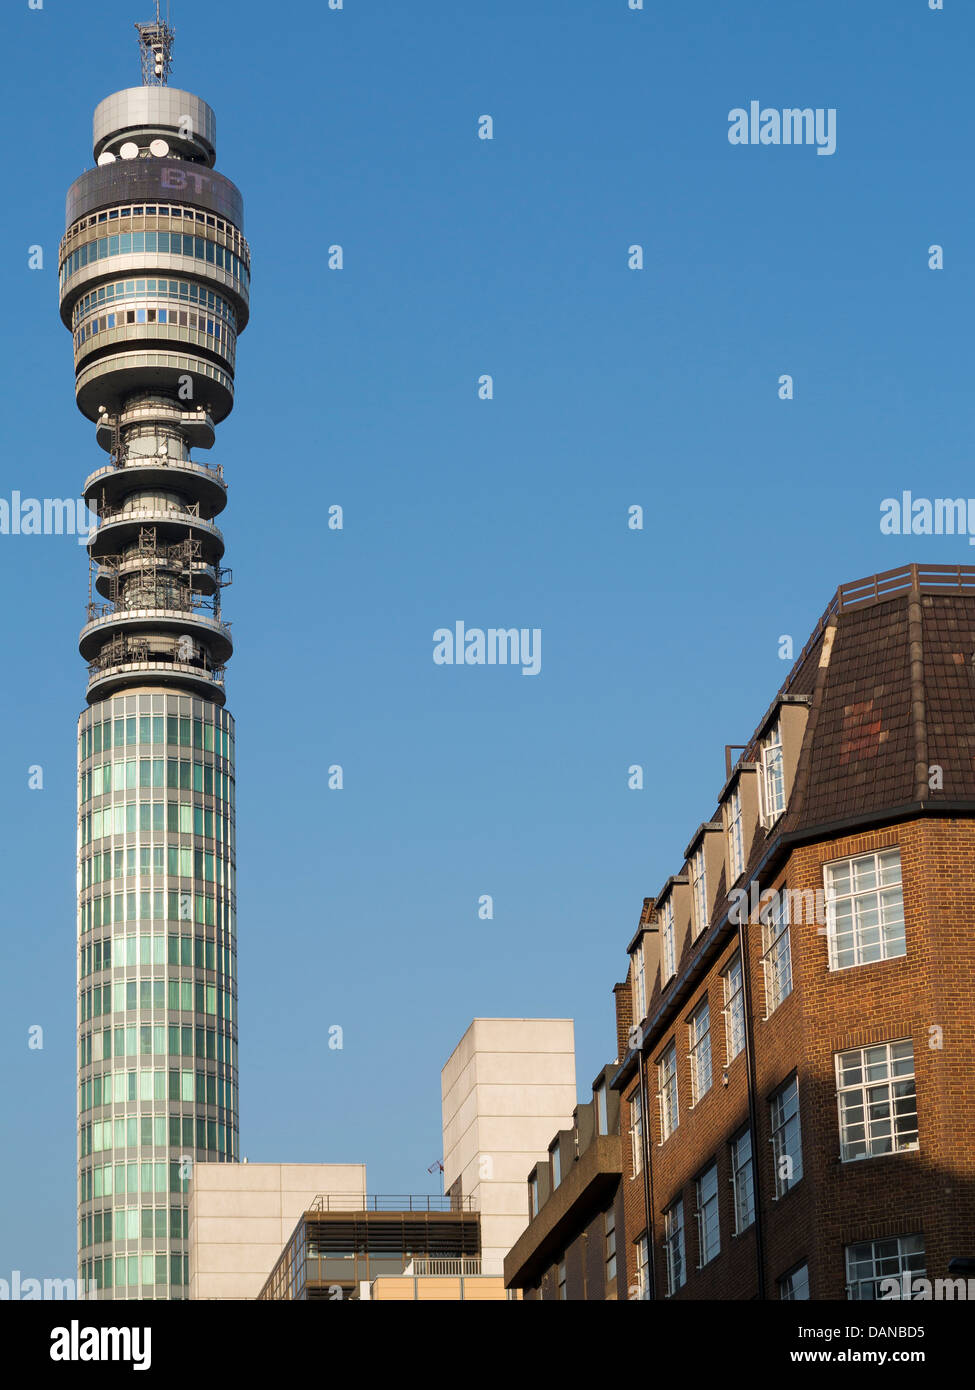 The BT Tower, previously the Post Office Tower, in London, England Stock Photo